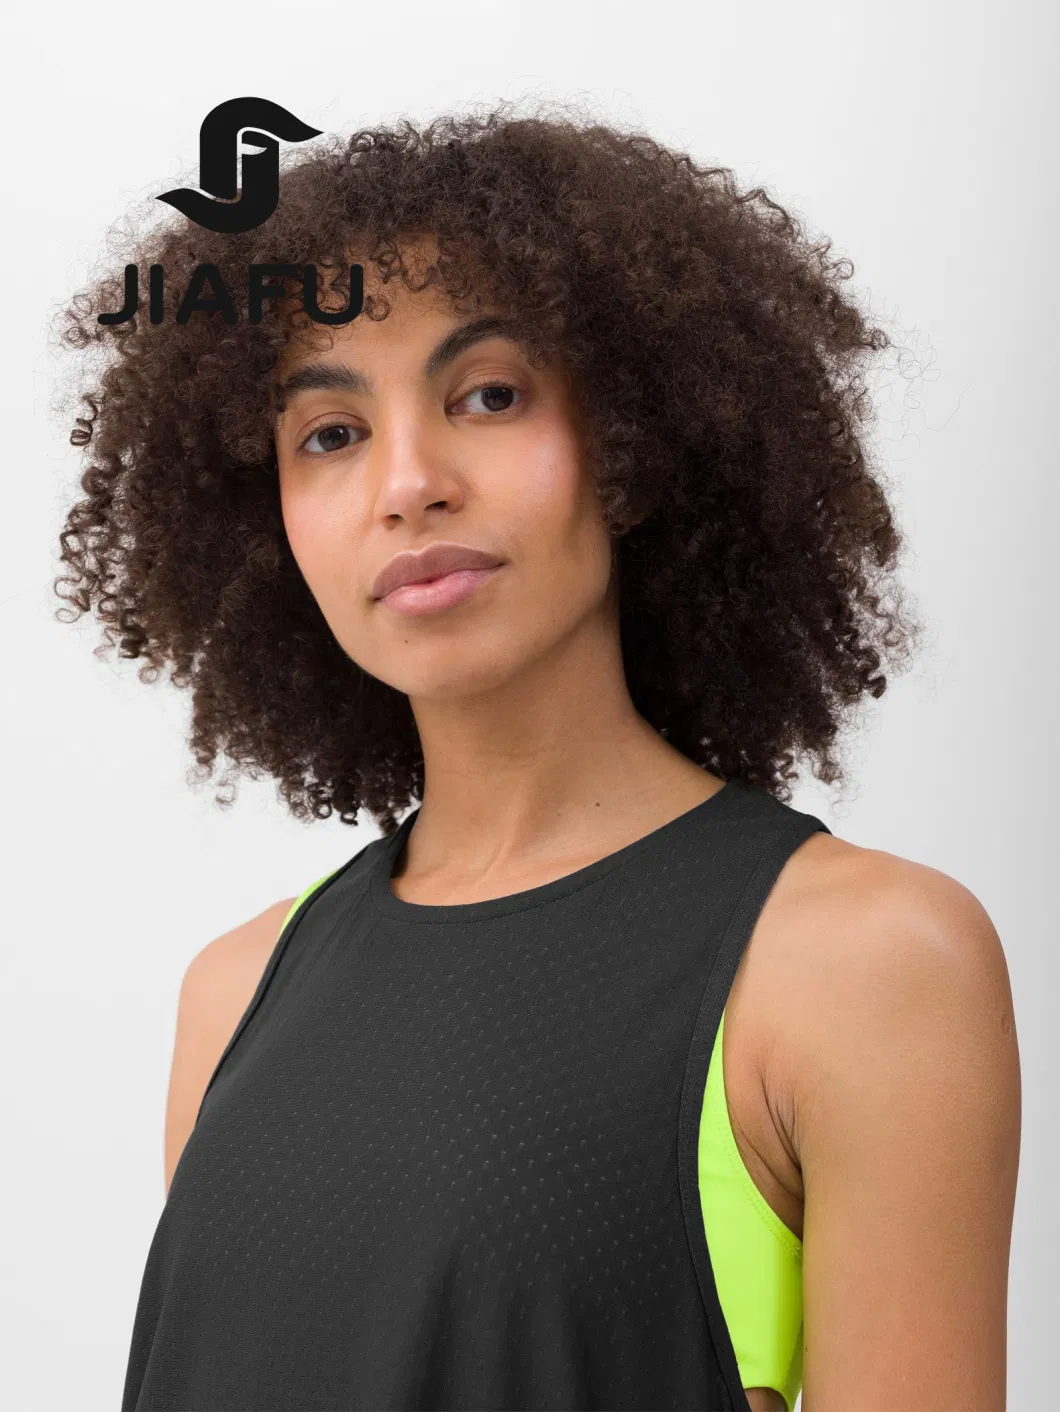 Woman&prime;s Sports Wear Quick Dry Running Tank Top Raceback Workout Vest